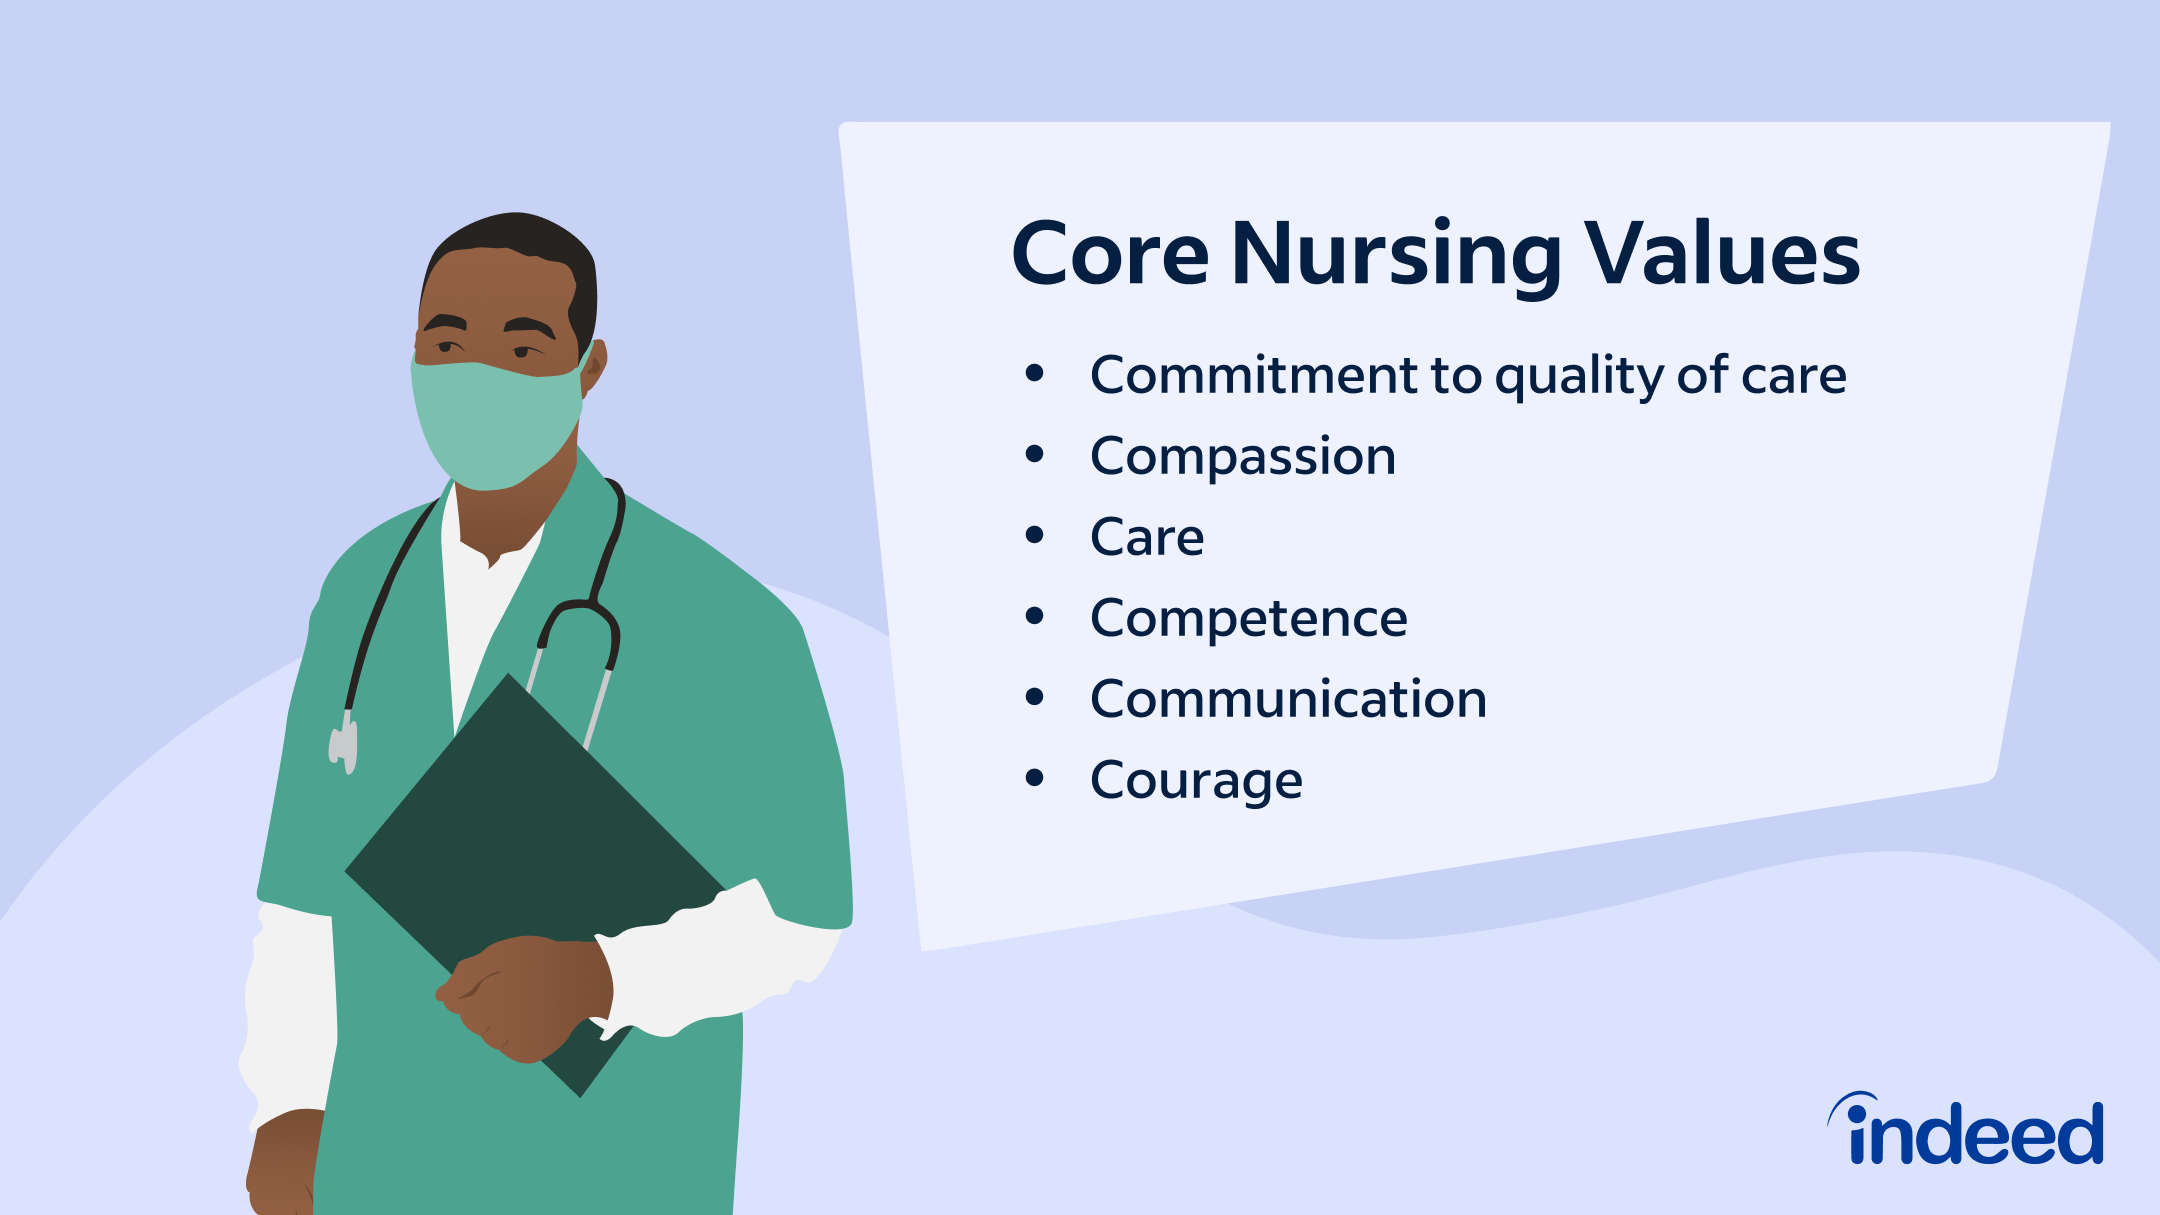 Your Nursing Career with a Personal Philosophy of Nursing